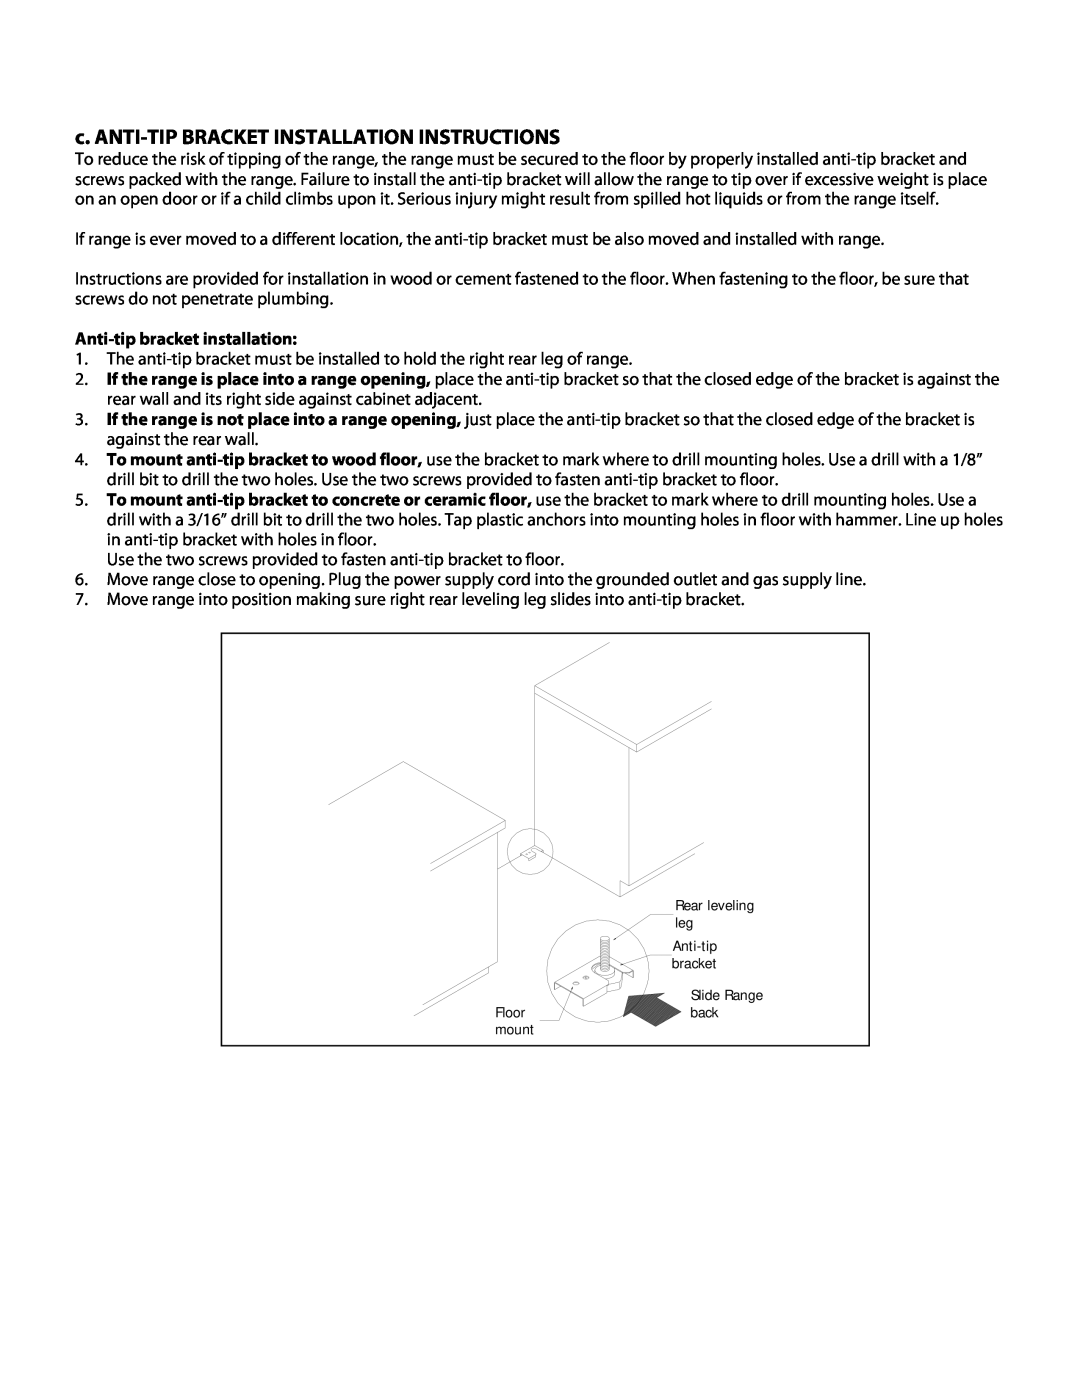 Danby DER2009W Electrical Connections, c. ANTI-TIP BRACKET INSTALLATION INSTRUCTIONS, Anti-tip bracket installation 